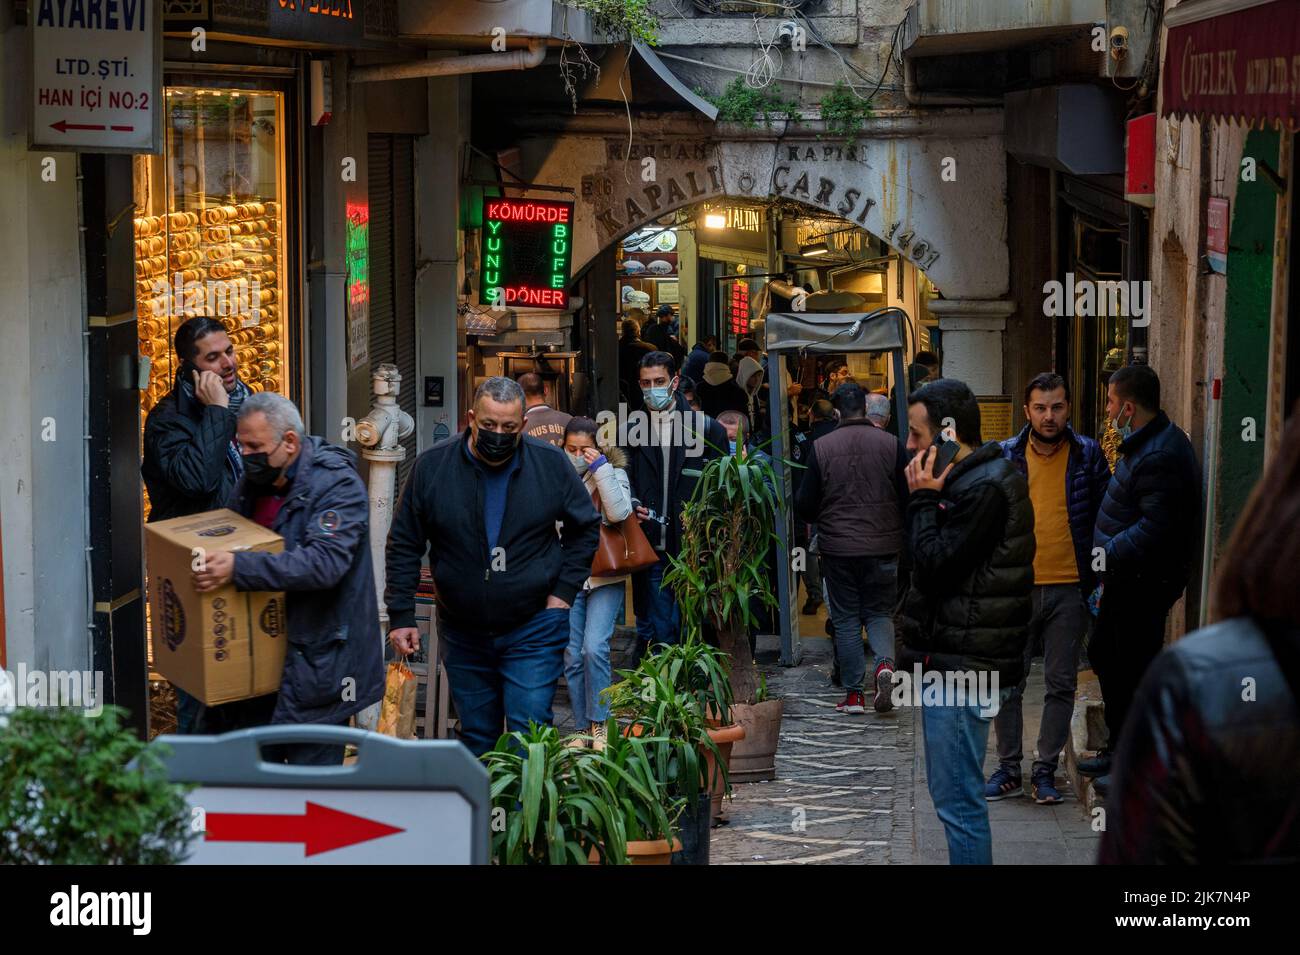 Istanbul, Turkey - 2022: People shopping in the Grand Bazar, handmade lamps, bags and carpets for sale Stock Photo